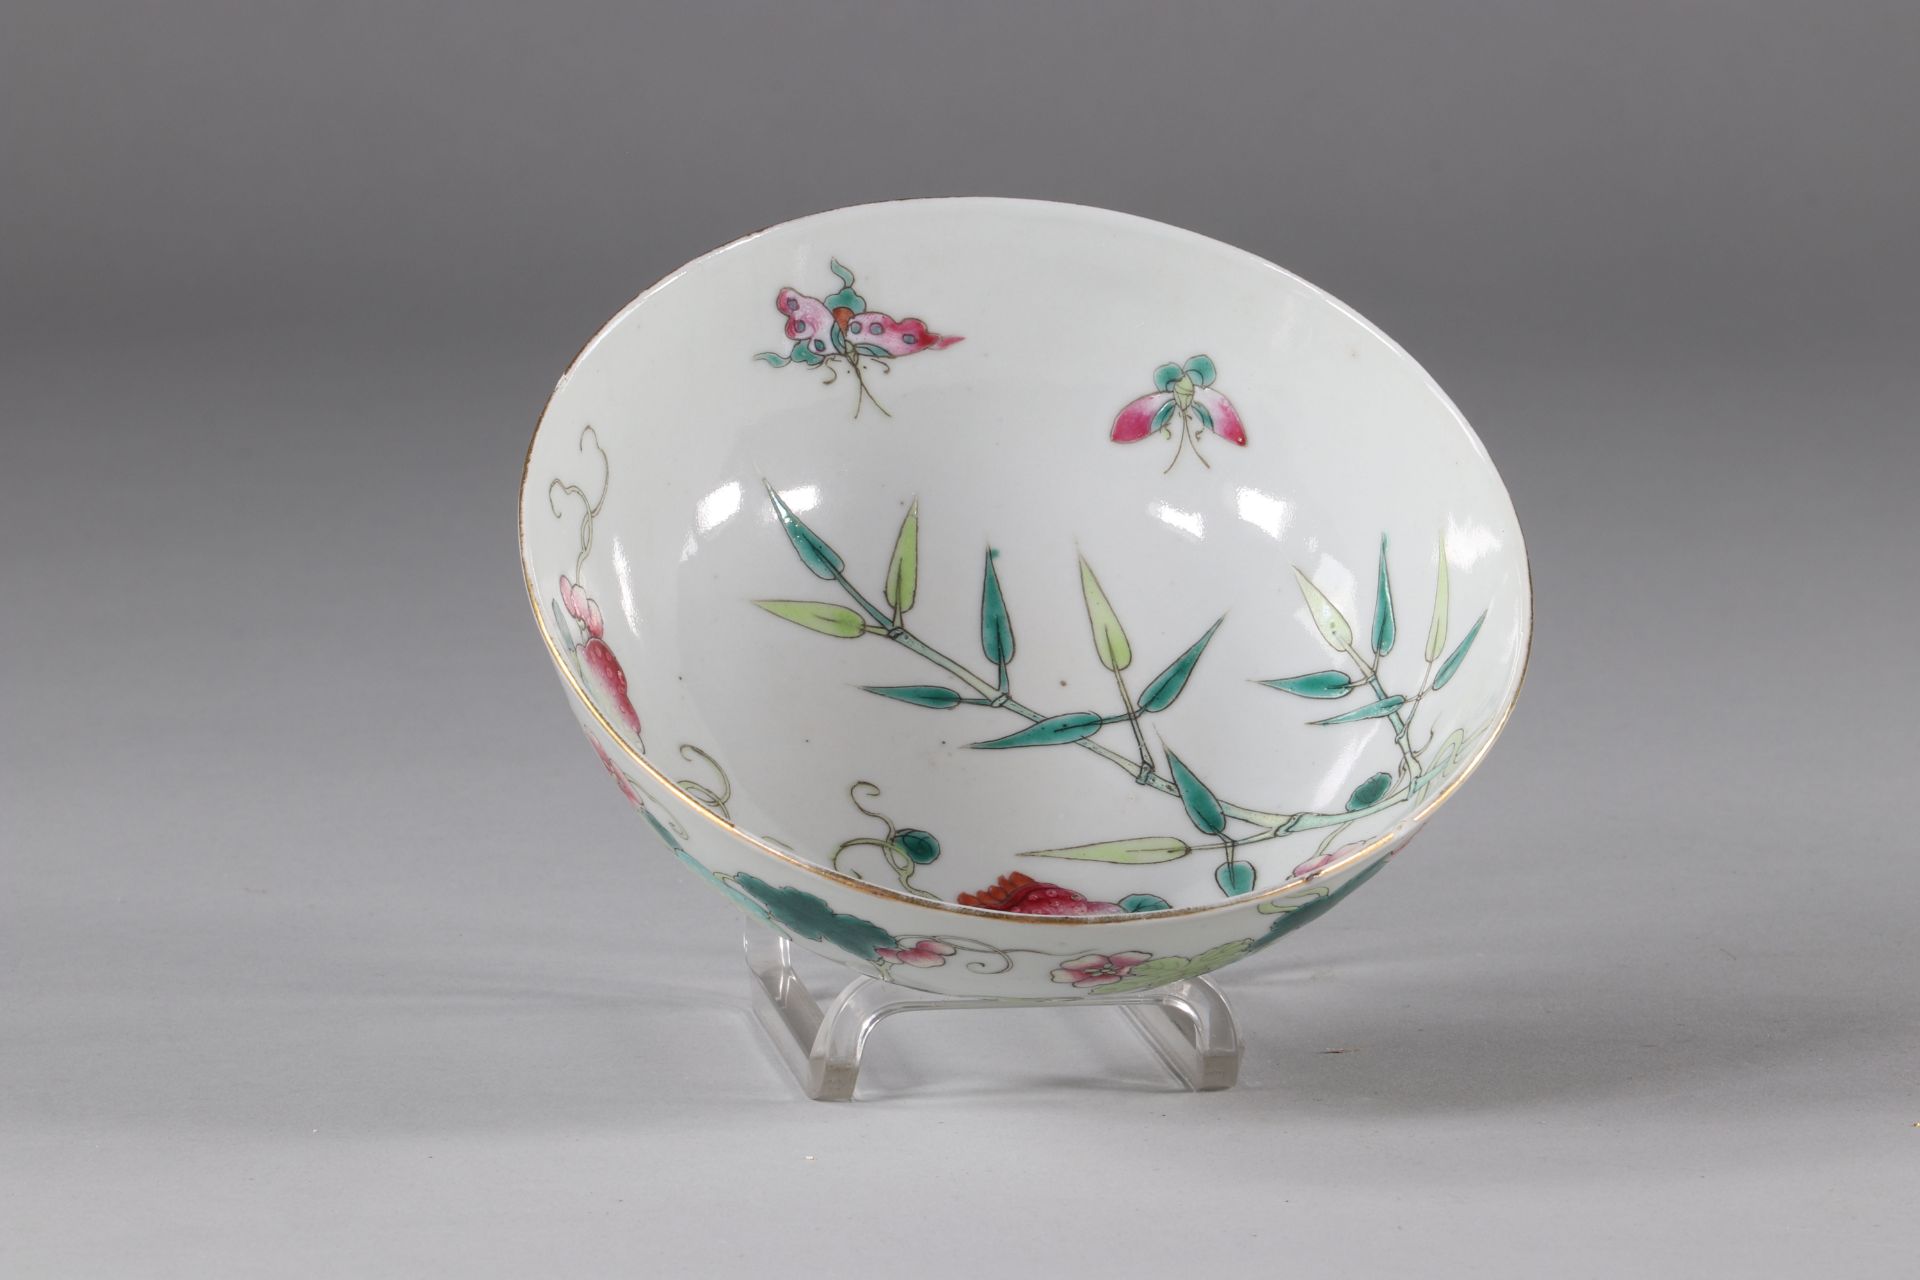 Porcelain bowl with balsam flowers, China Xuantong mark and period. - Image 3 of 4